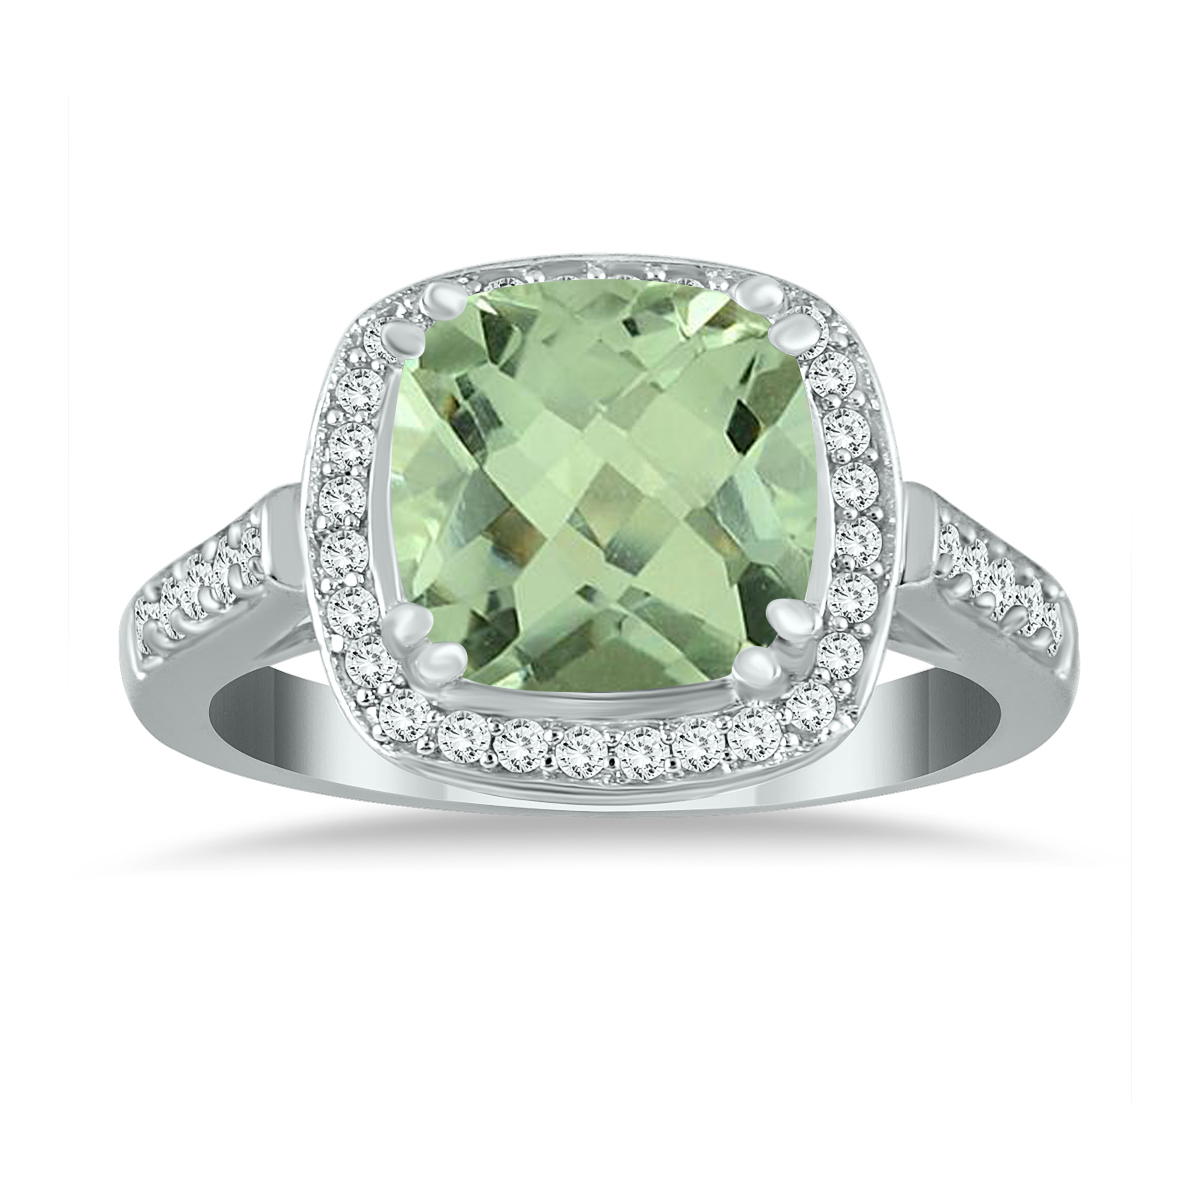 Cushion Cut Green Amethyst and Diamond Ring in 14K White Gold